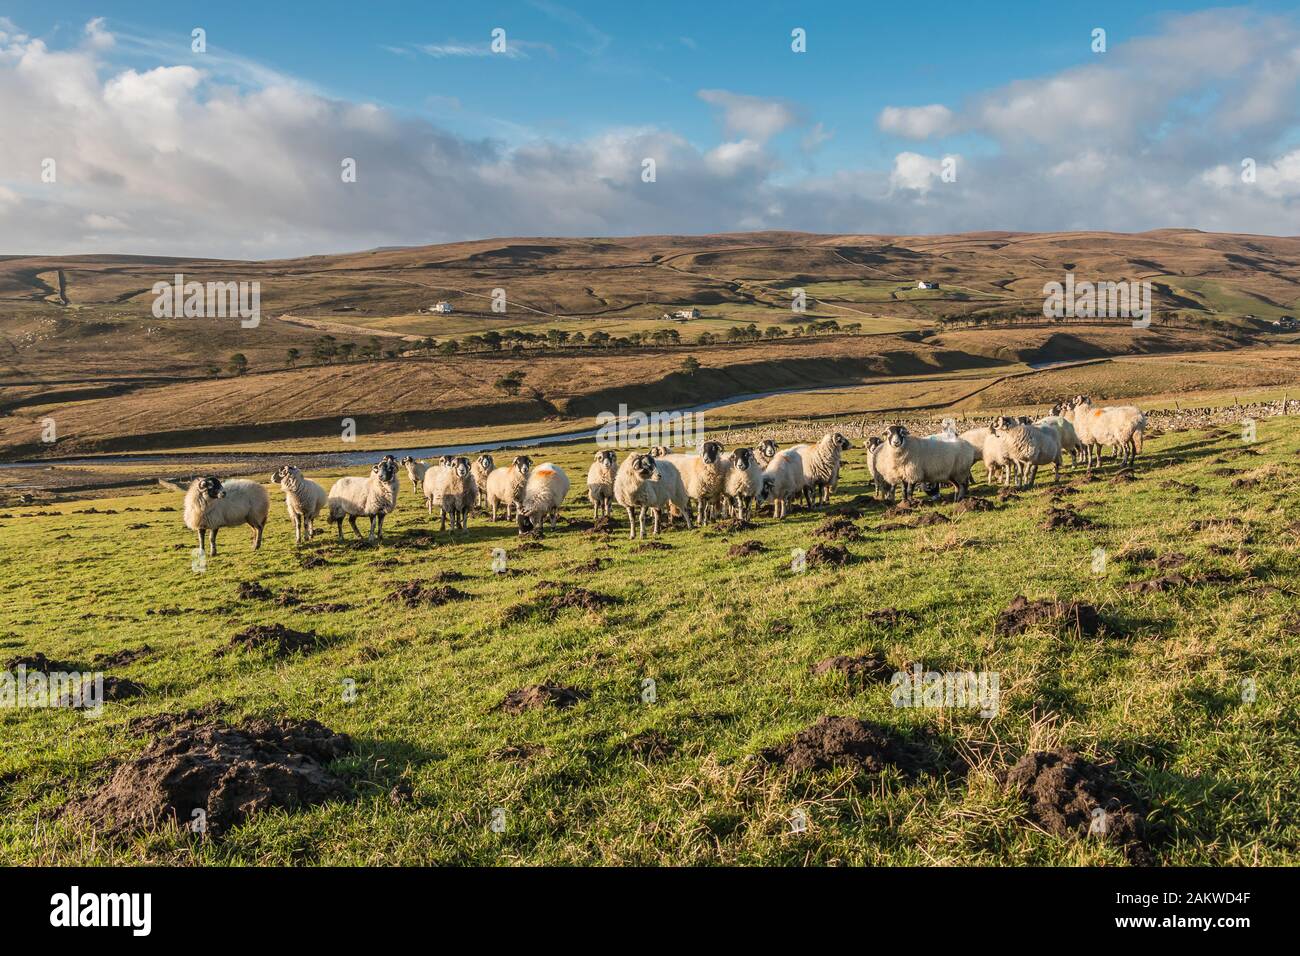 Teesdale Landscape, Harwood Upper Teesdale, January 2020. A flock of inquisitive sheep investigate the photographer. Stock Photo